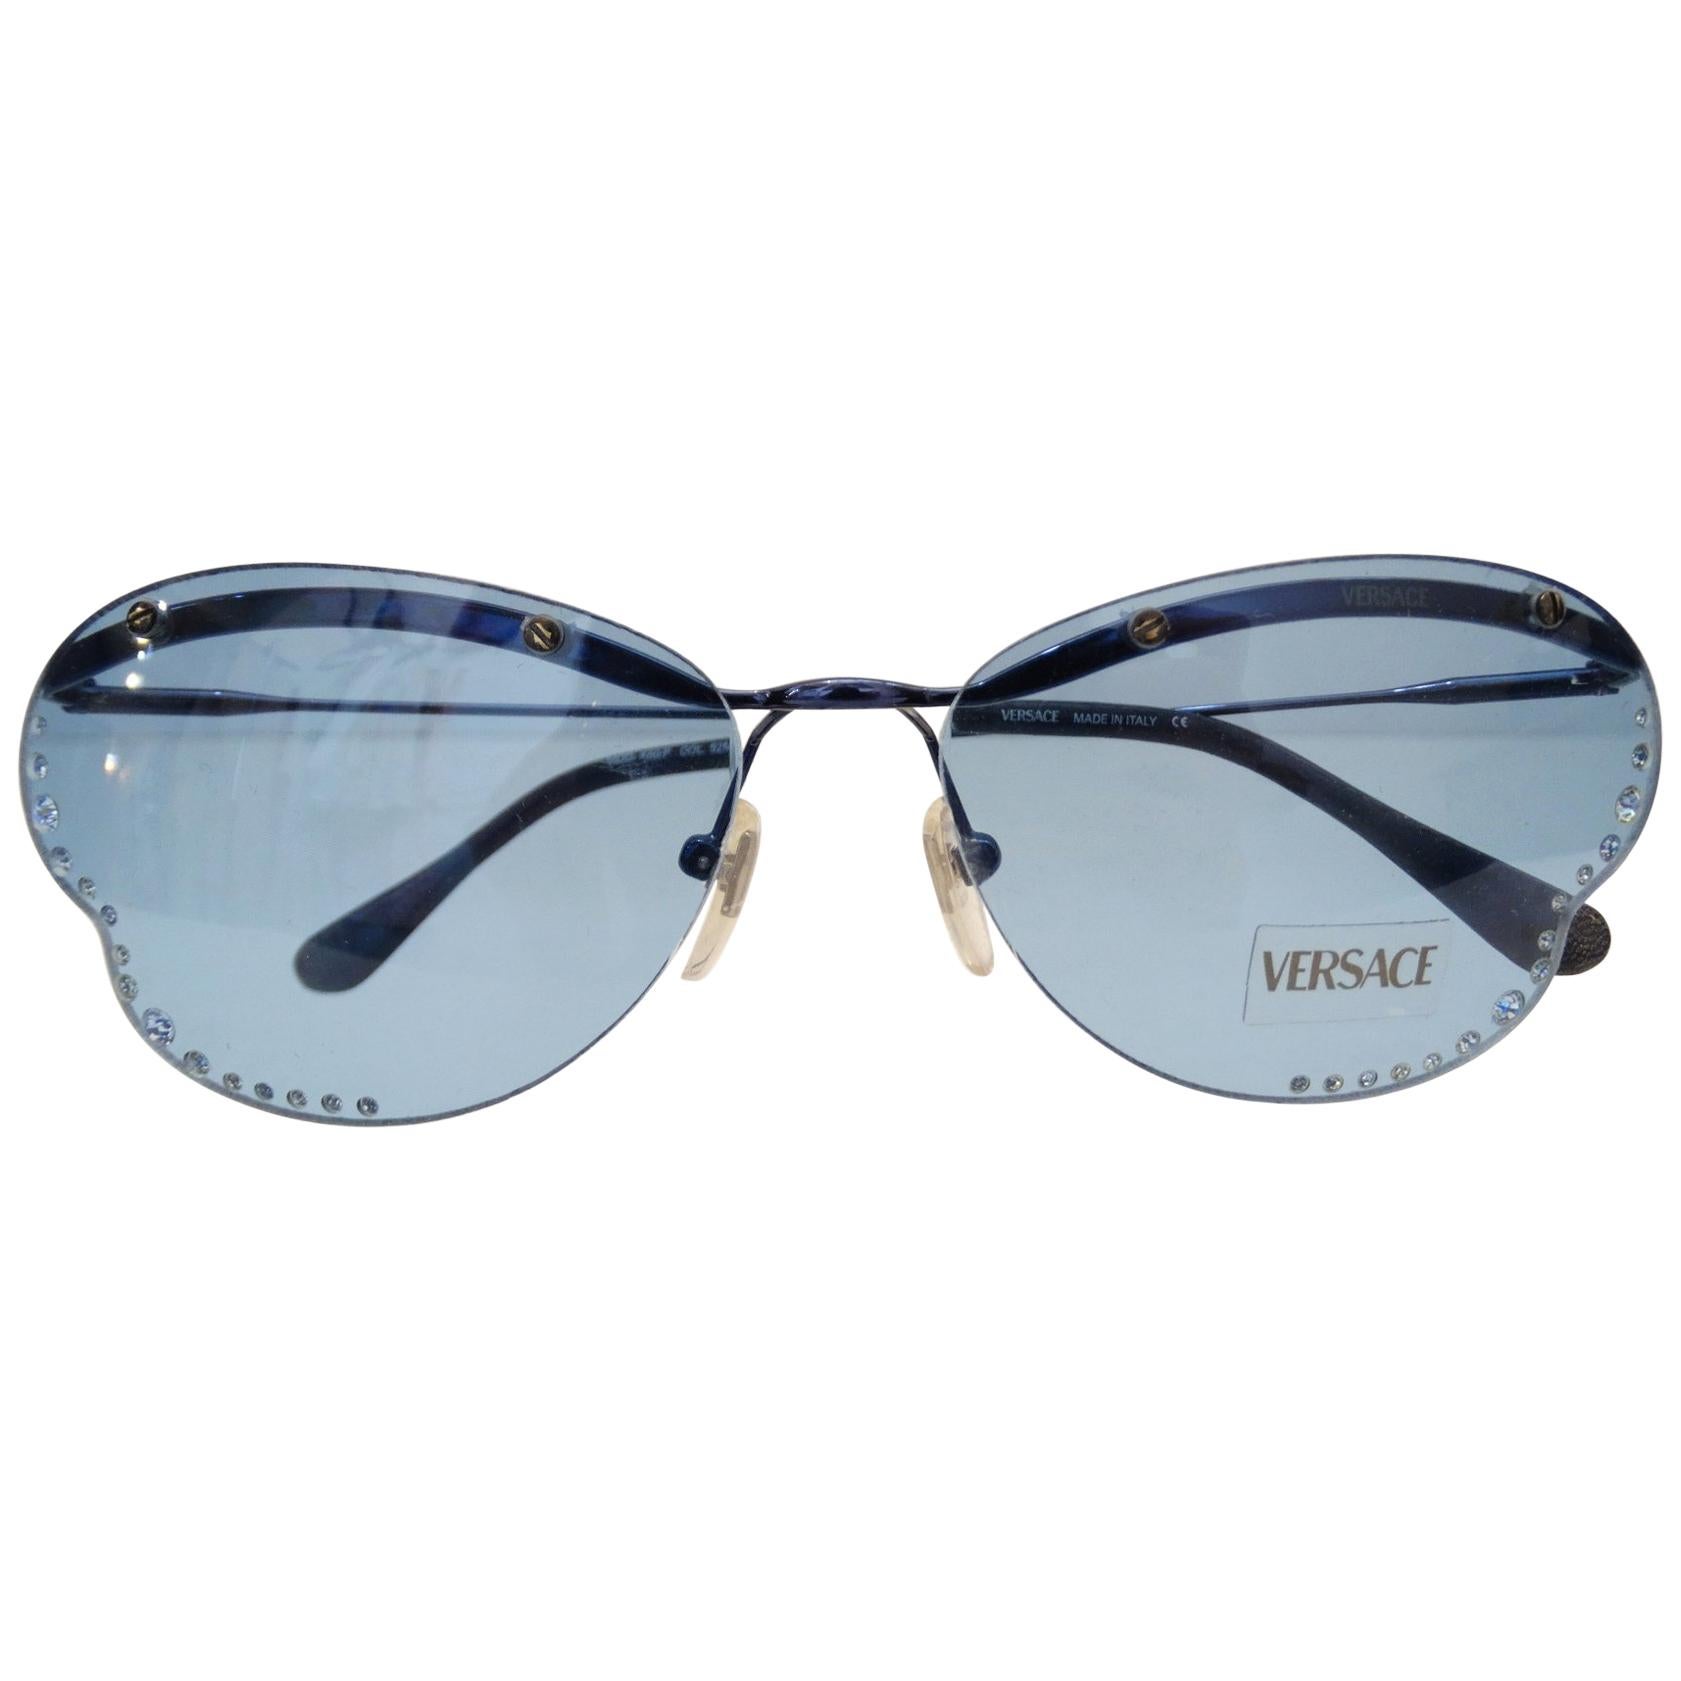 Versace 1990s Blue Butterfly Lens Sunglasses with Rhinestones